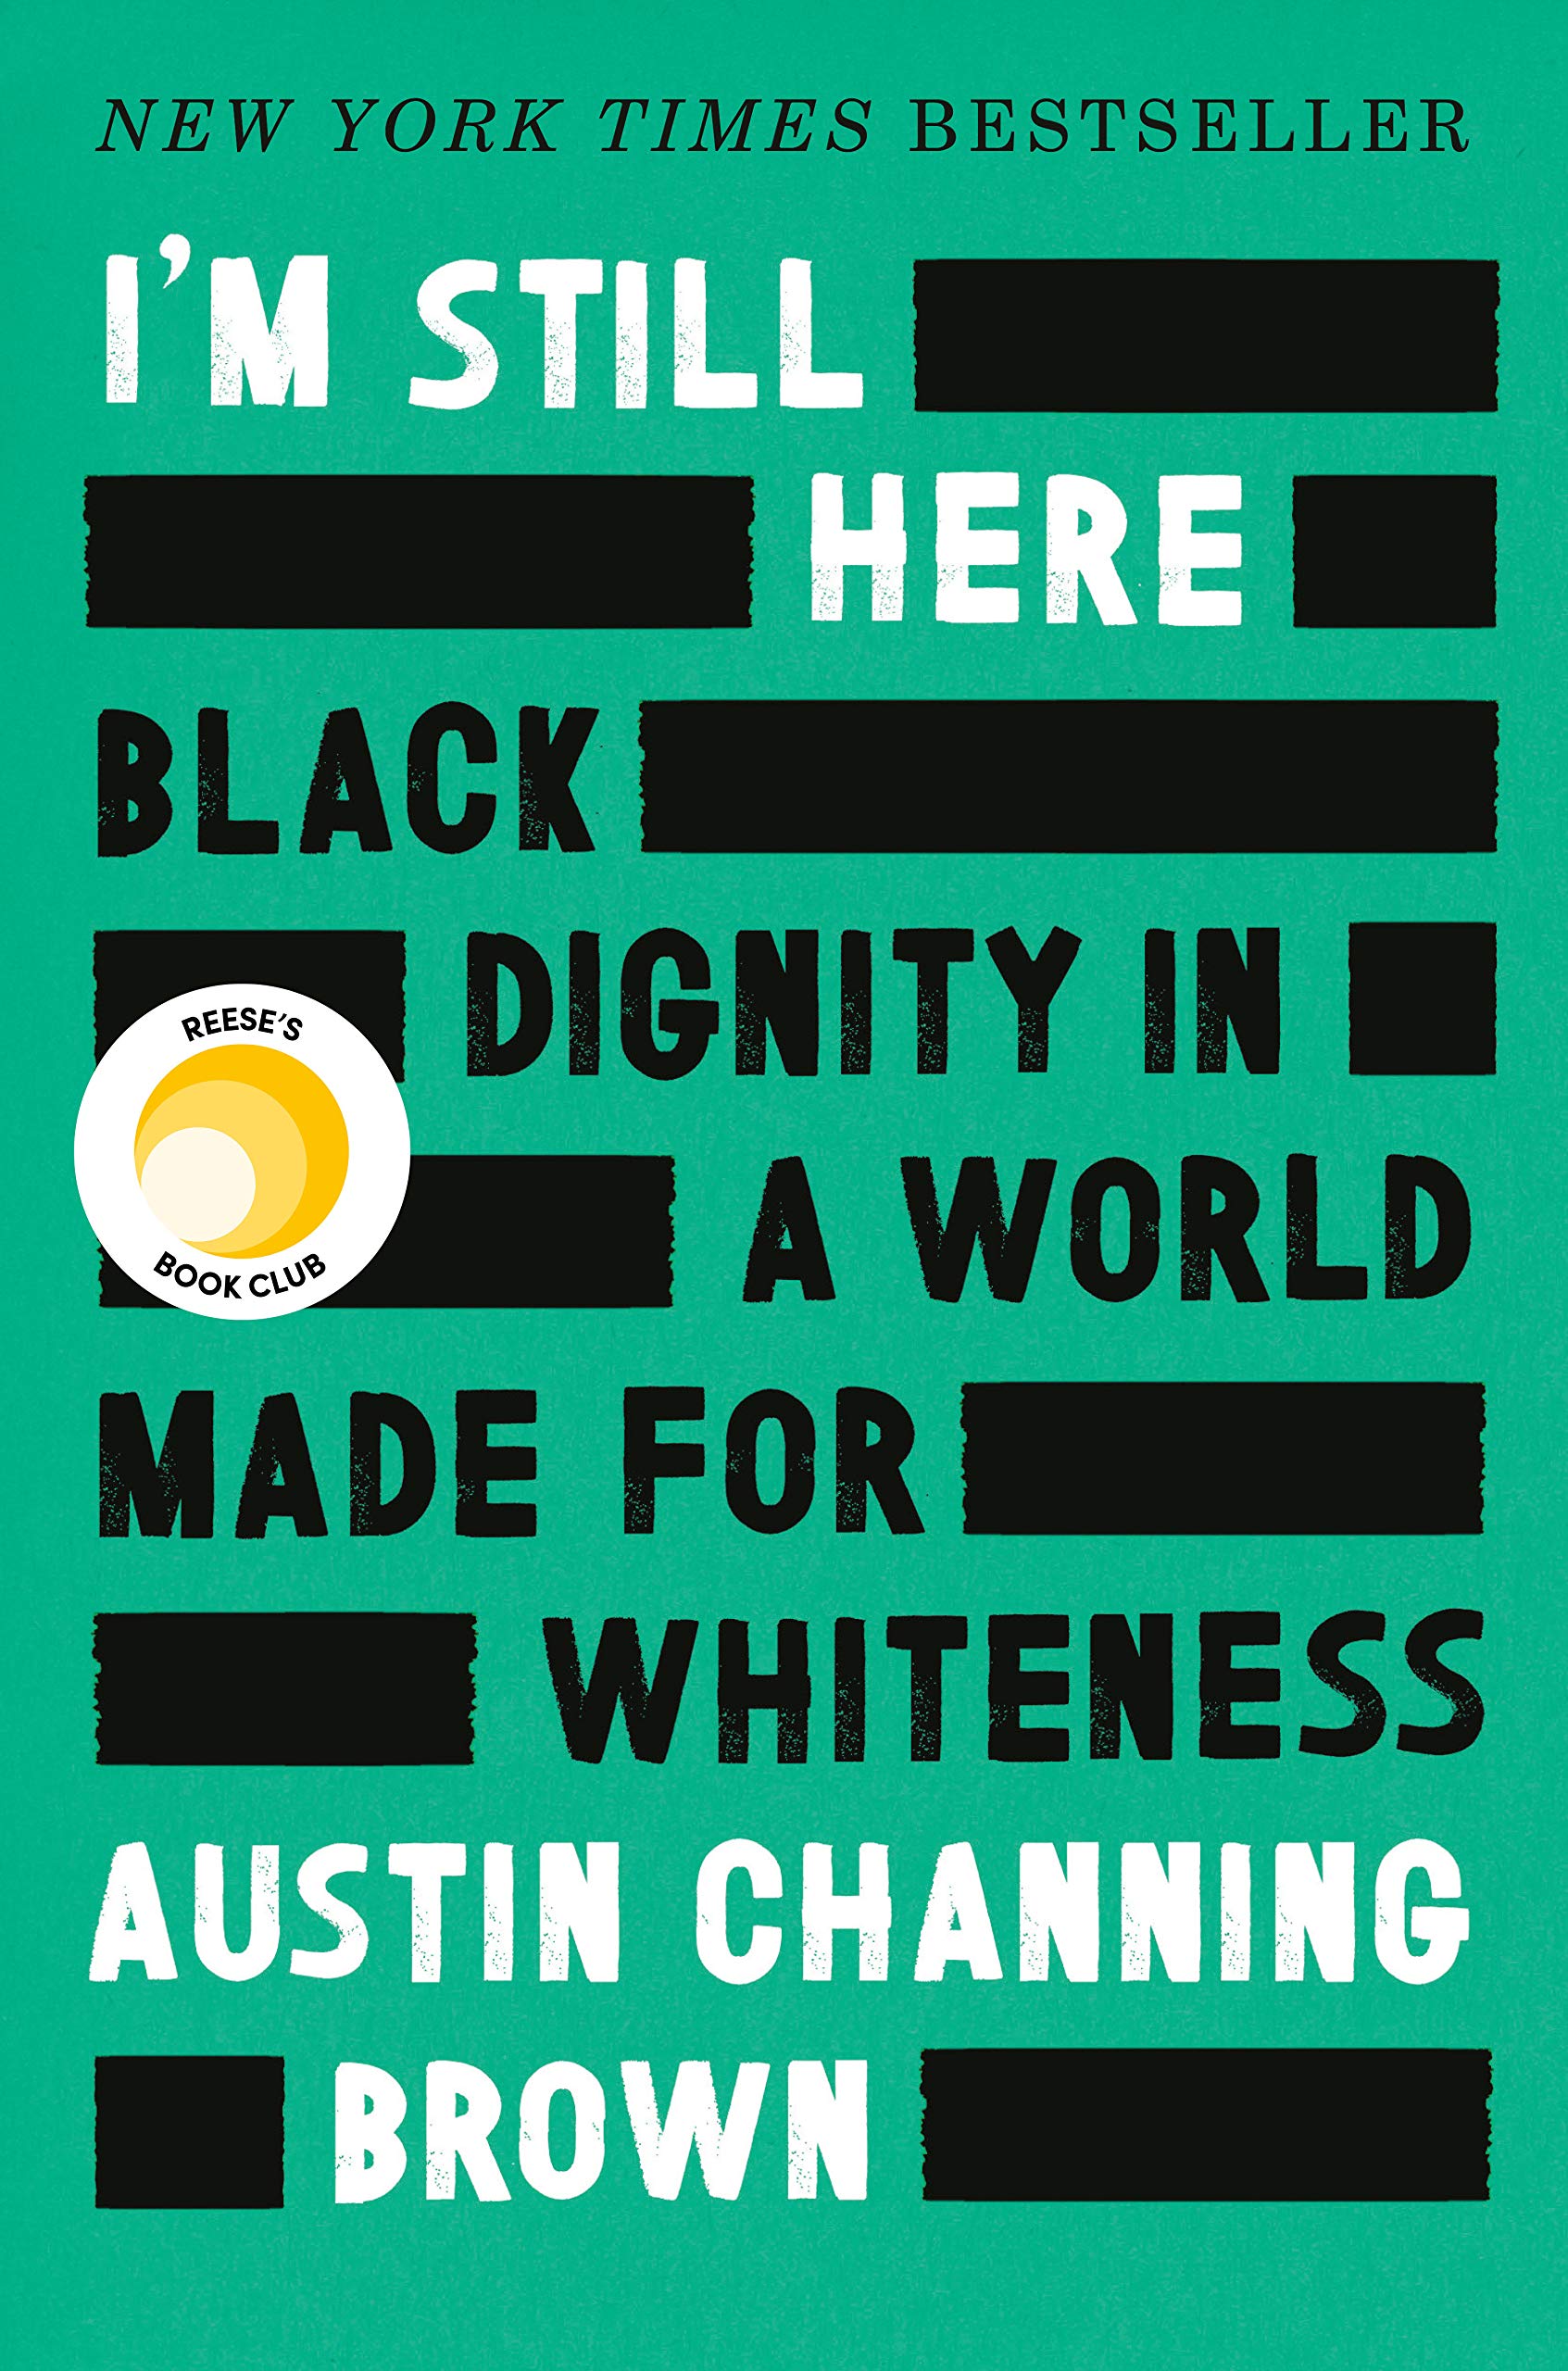 I'm Still Here by Austin Channing Brown PDF Download